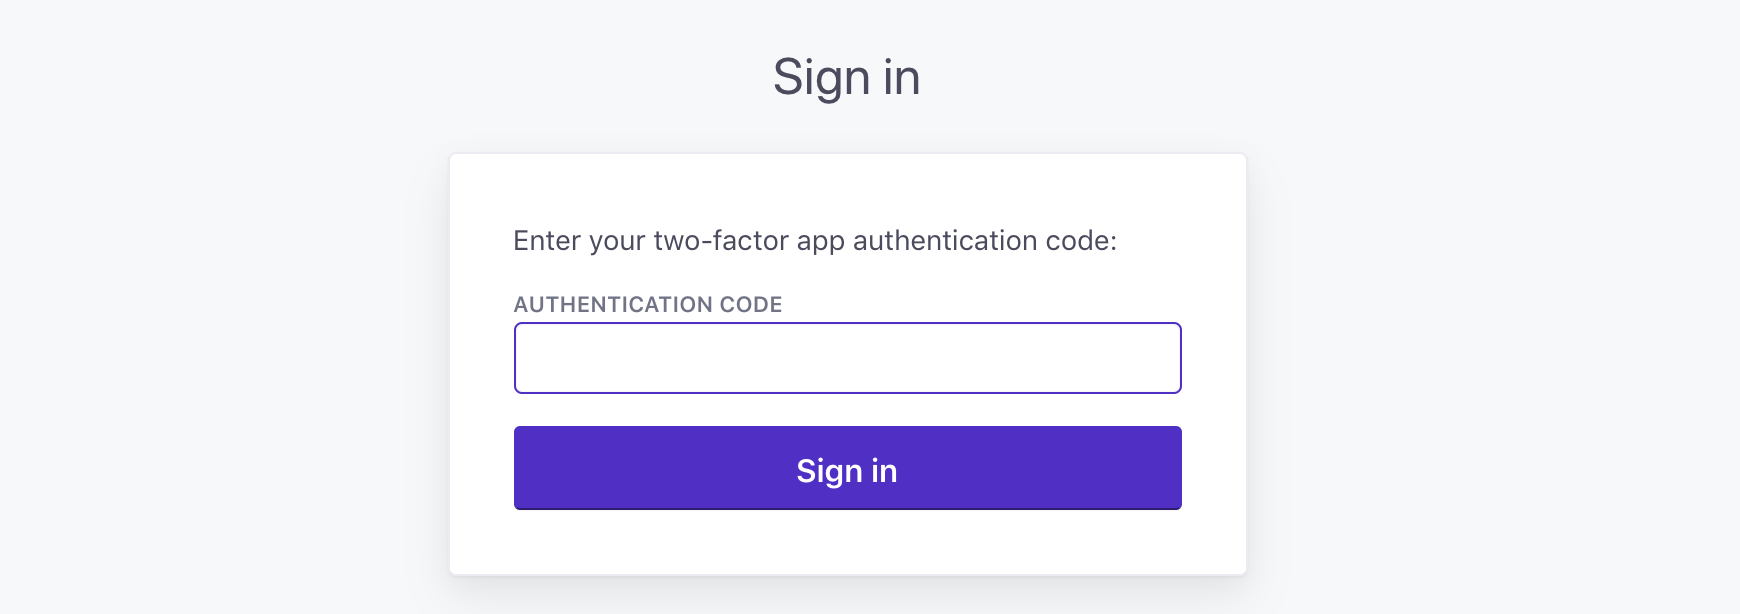 Two-Factor Authentication code